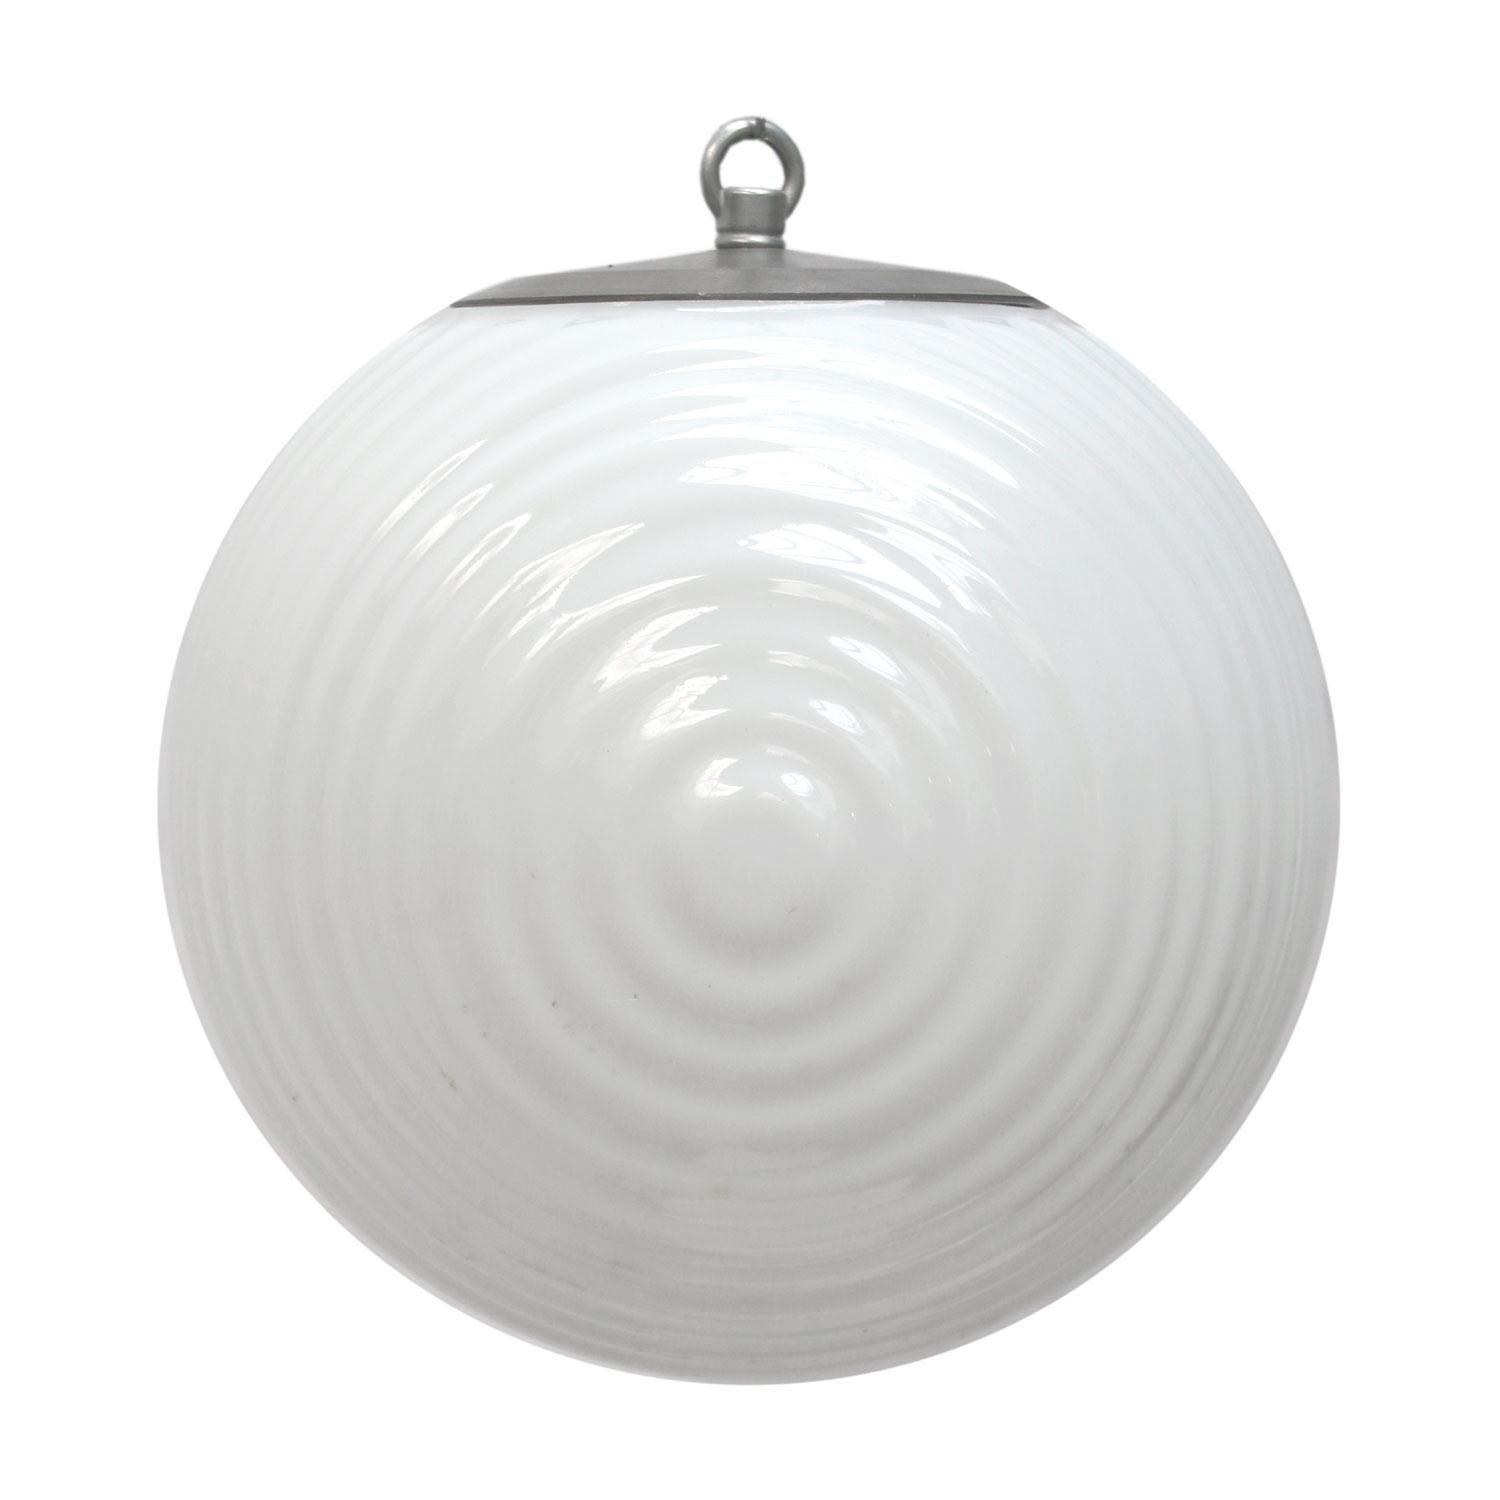 Ribbed opaline glass pendant.

Weight: 2.00 kg / 4.4 lb

Priced per individual item. All lamps have been made suitable by international standards for incandescent light bulbs, energy-efficient and LED bulbs. E26/E27 bulb holders and new wiring